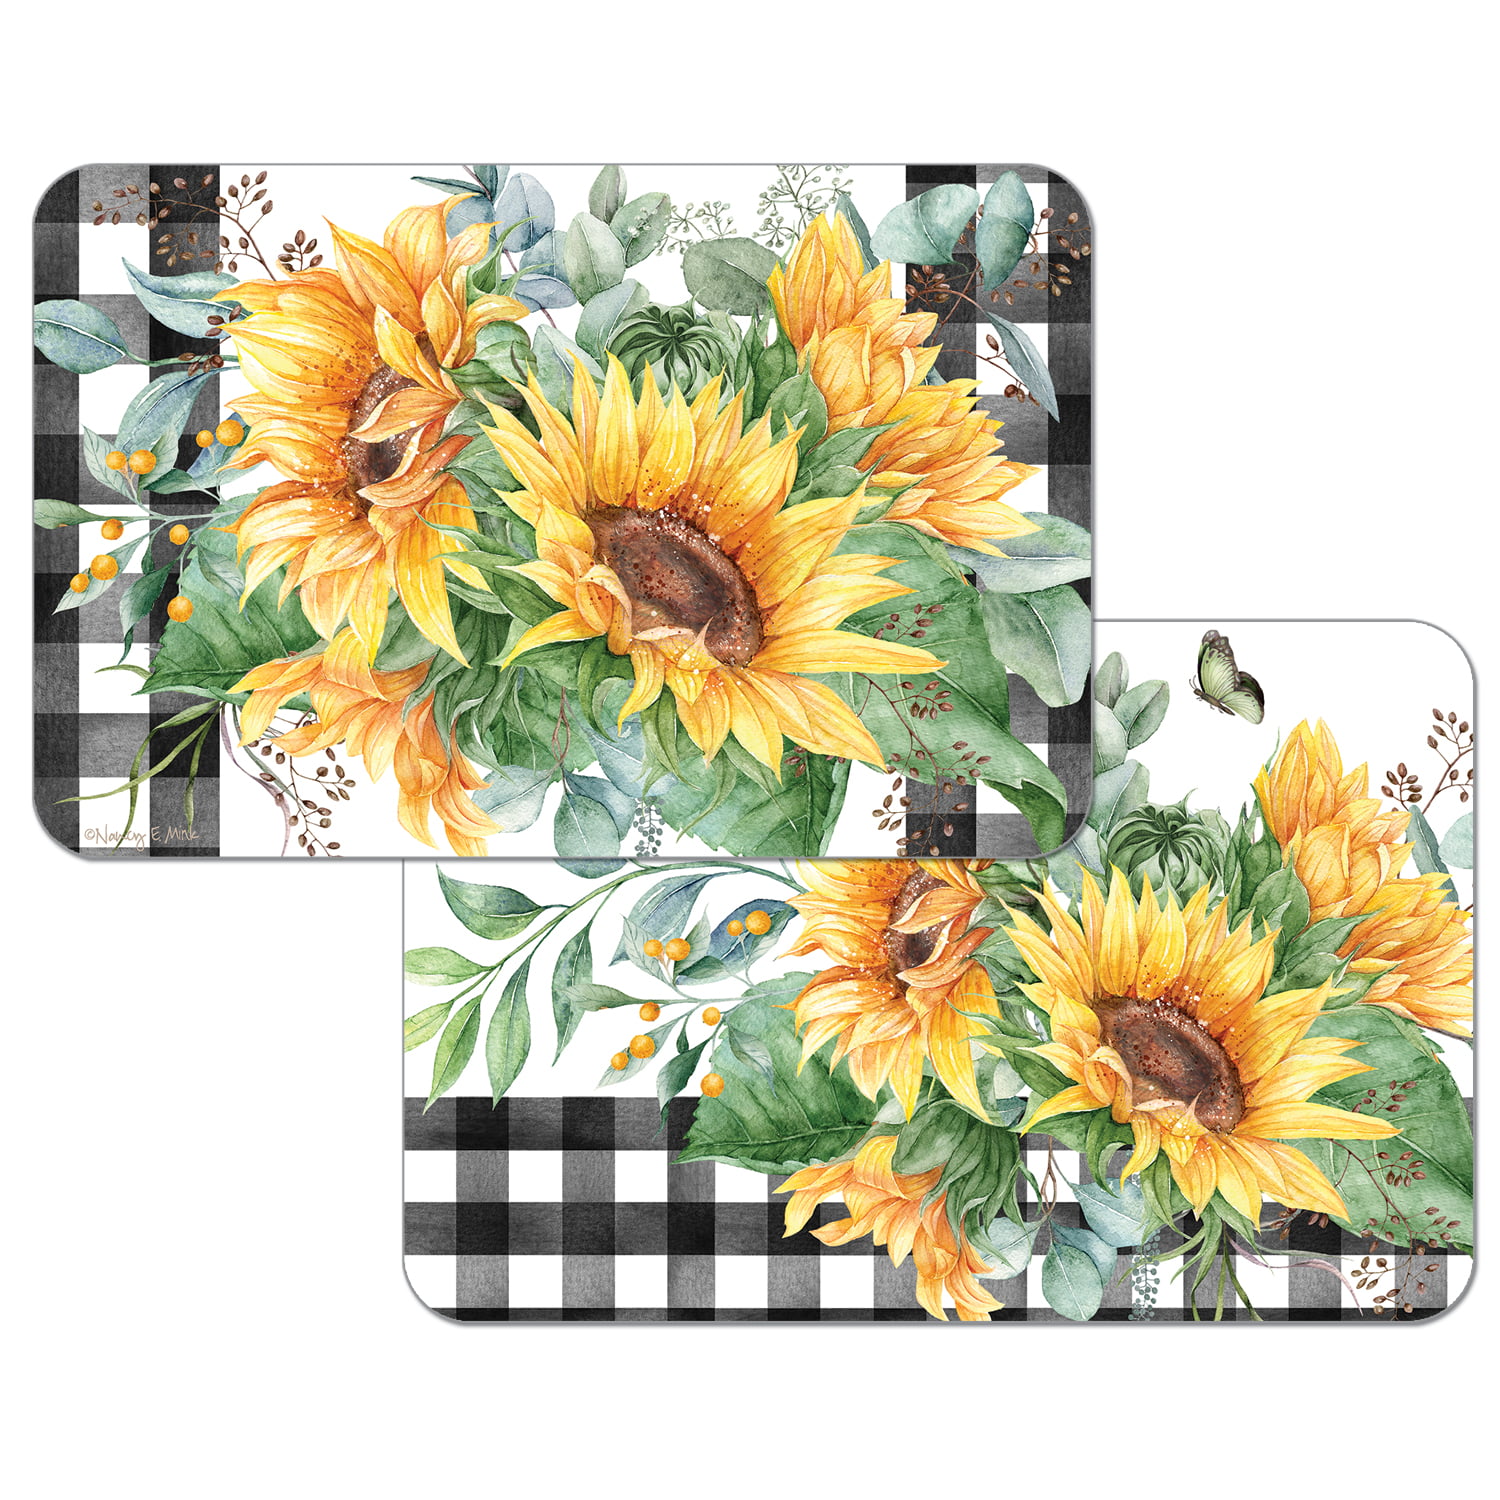 Details about   S4Sassy Leaves & Split Corona Daffodil Placemats & Napkins Table Mats-FL-739J 